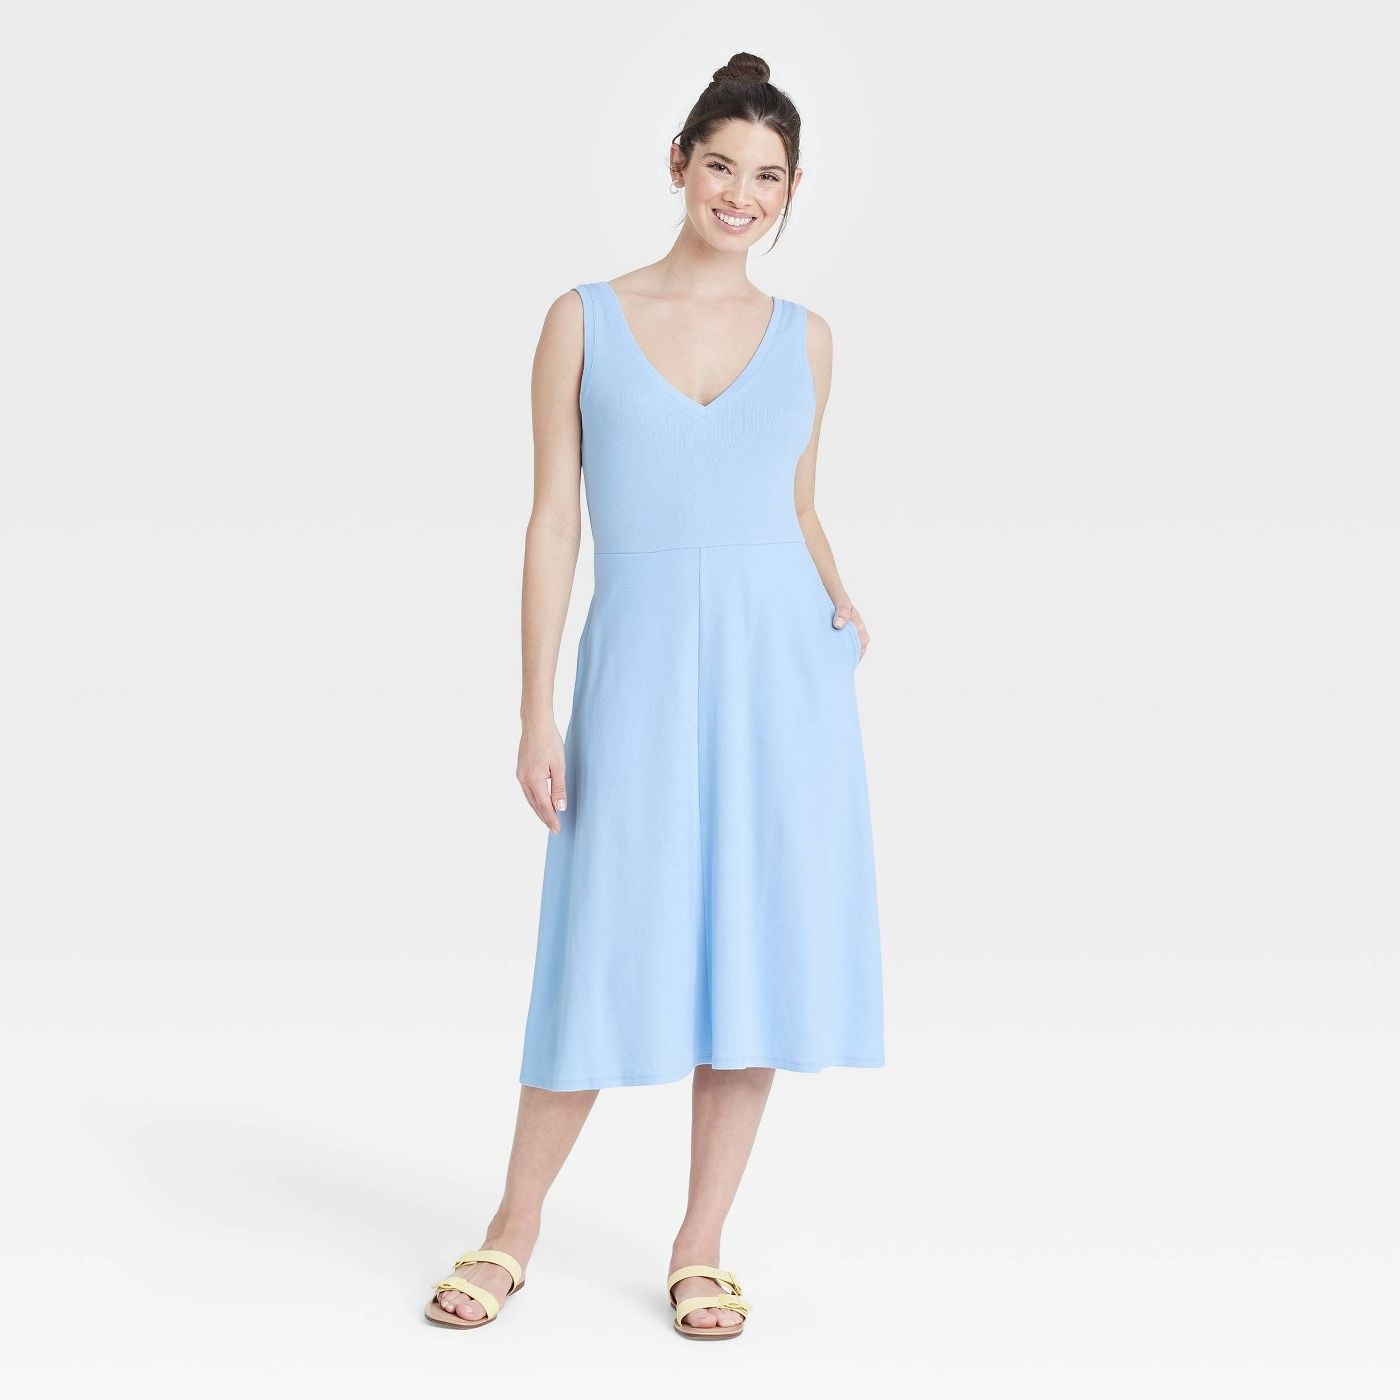 Model wearing light blue dress and cream shoes